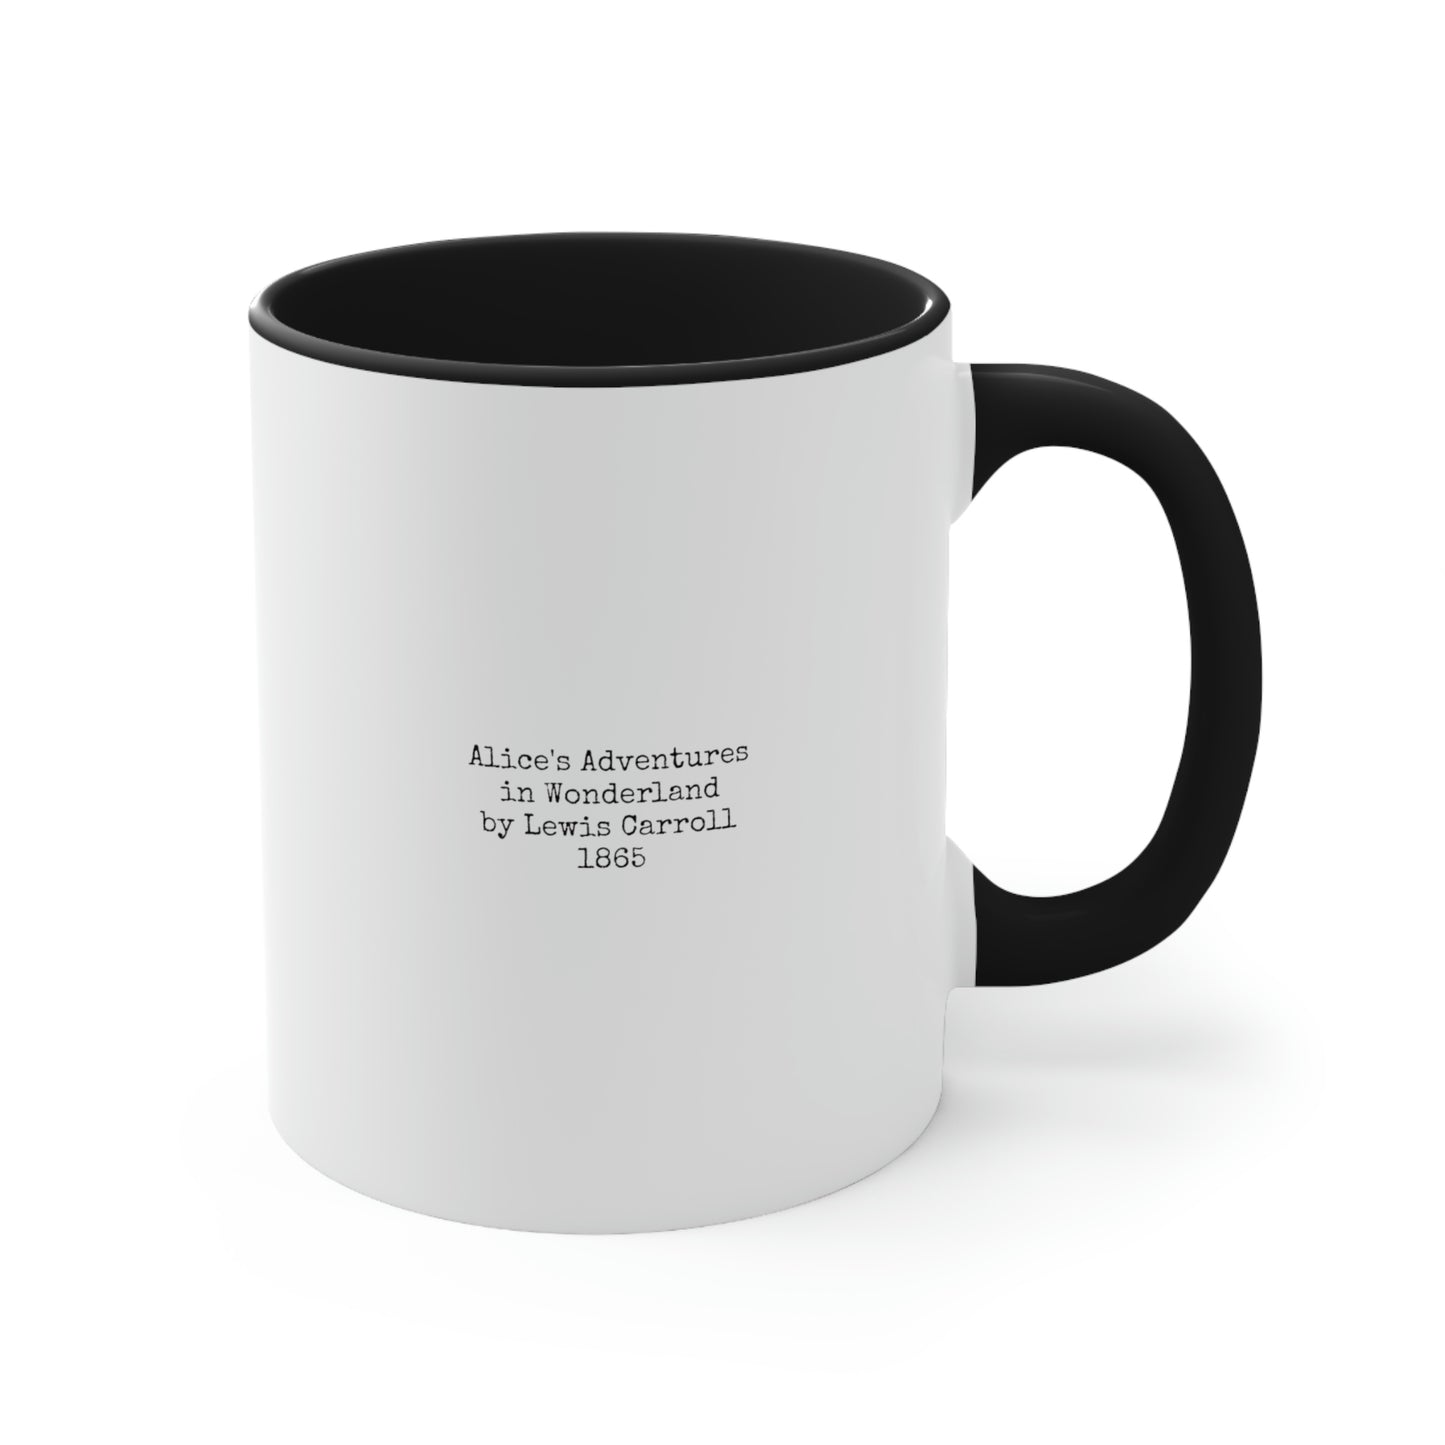 Anne of Green Gables Quote Accent Coffee Mug, 11oz